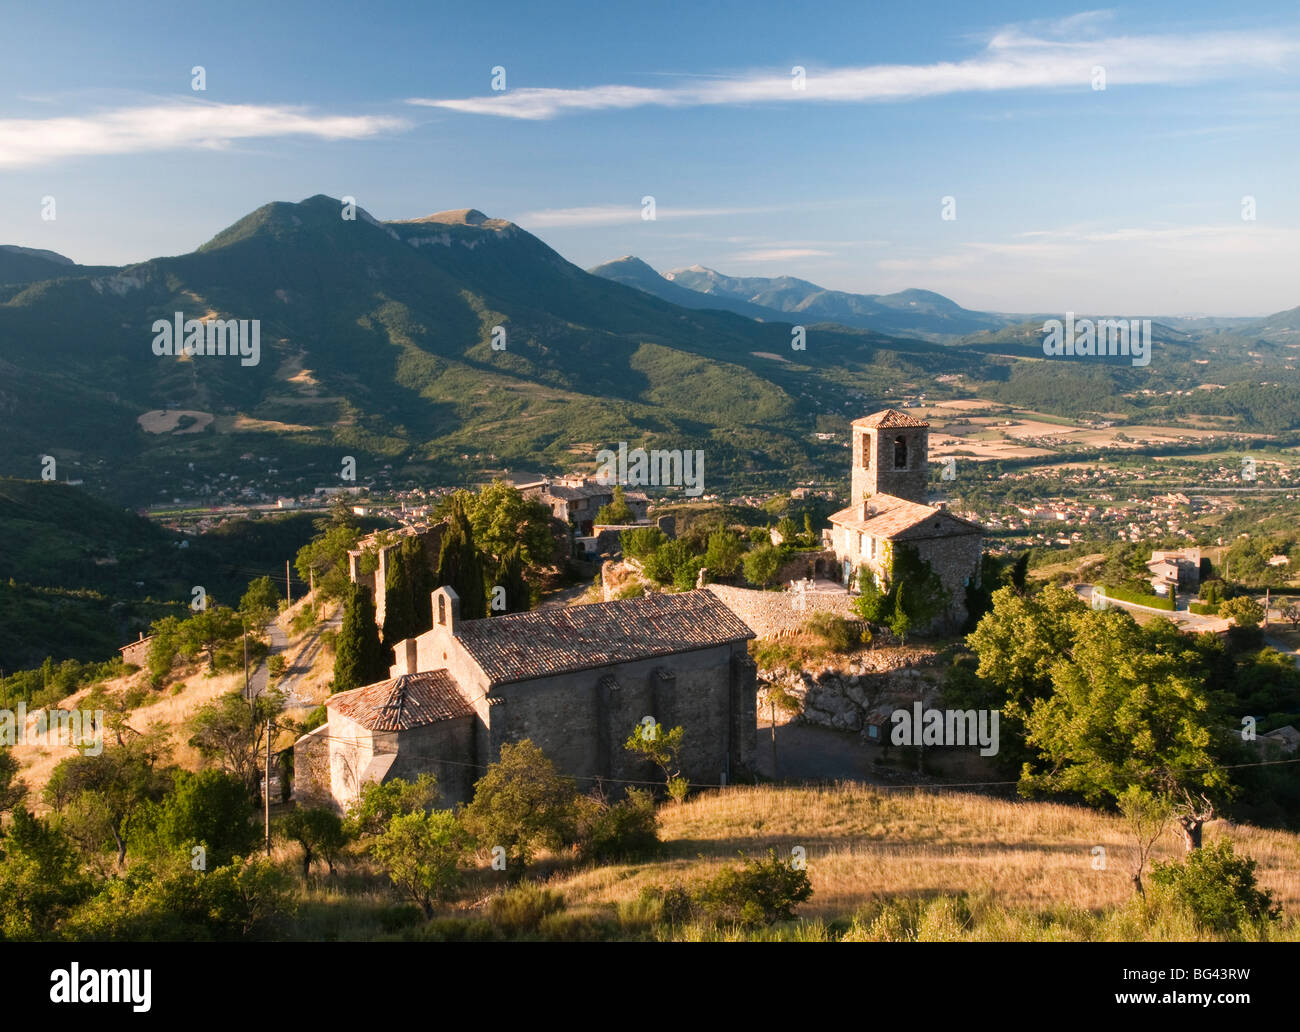 Kirche in Courbons, Provence, Frankreich Stockfoto